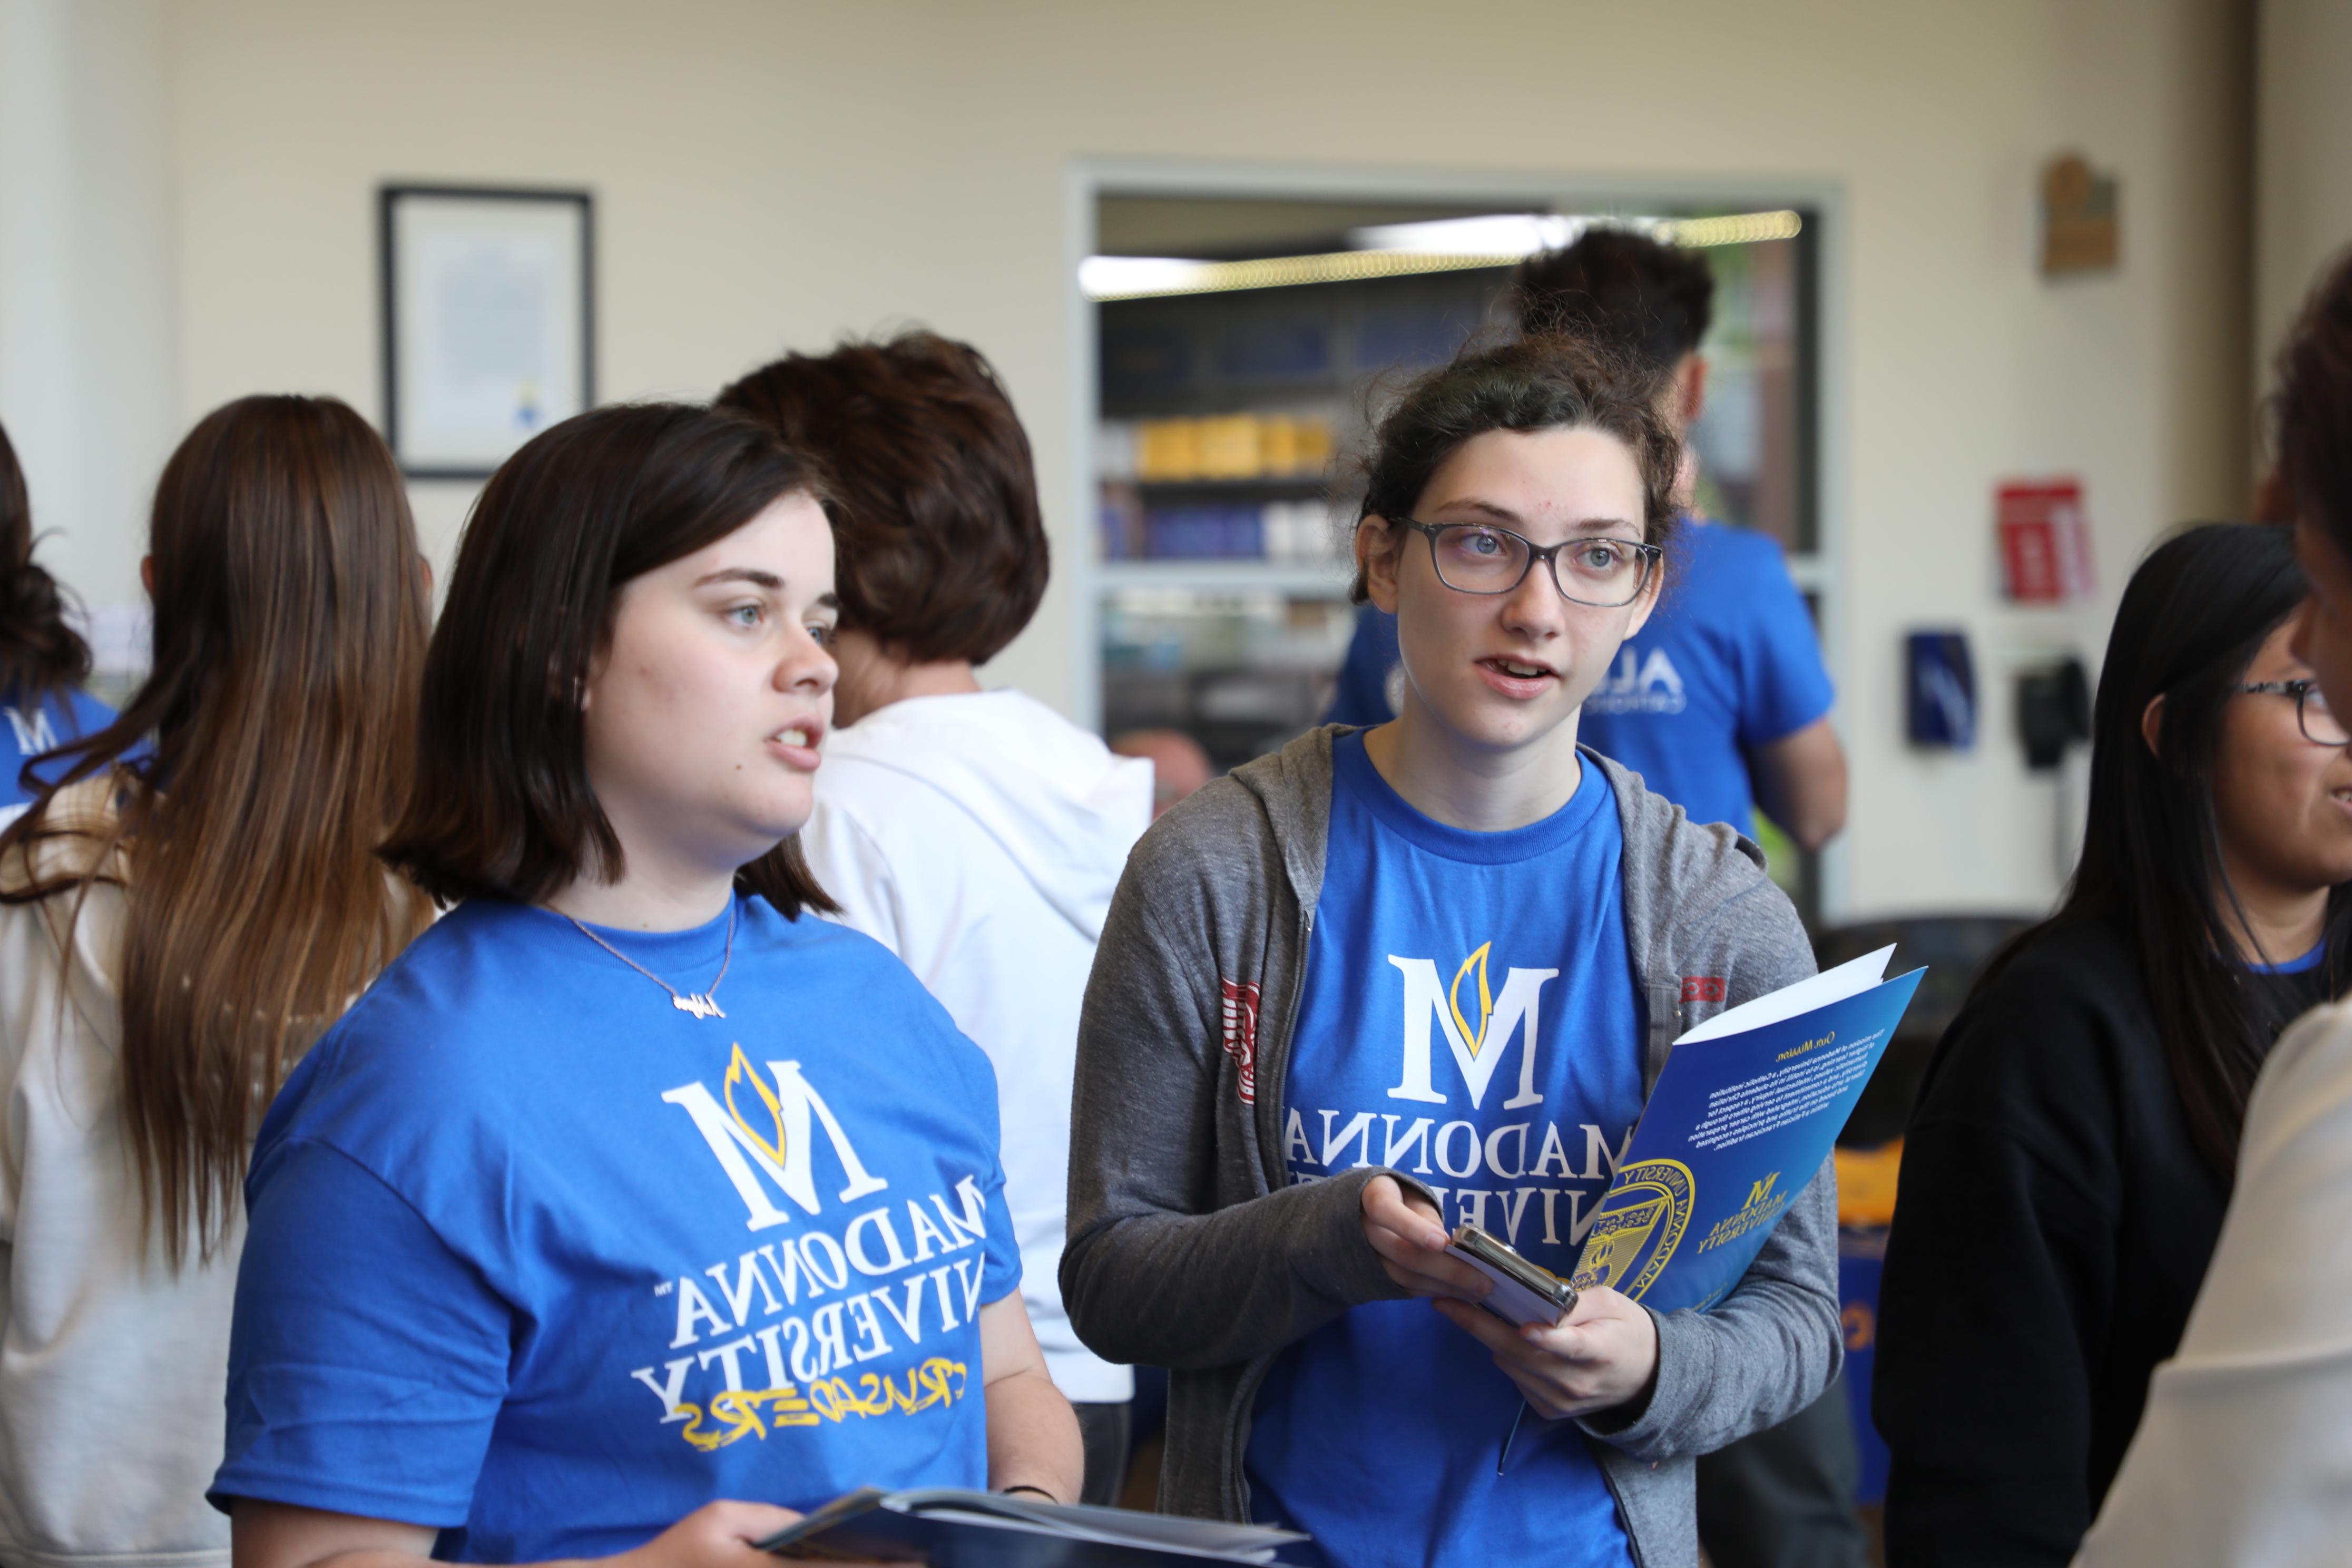 two students in Madonna University shirts listening to someone behind the camera